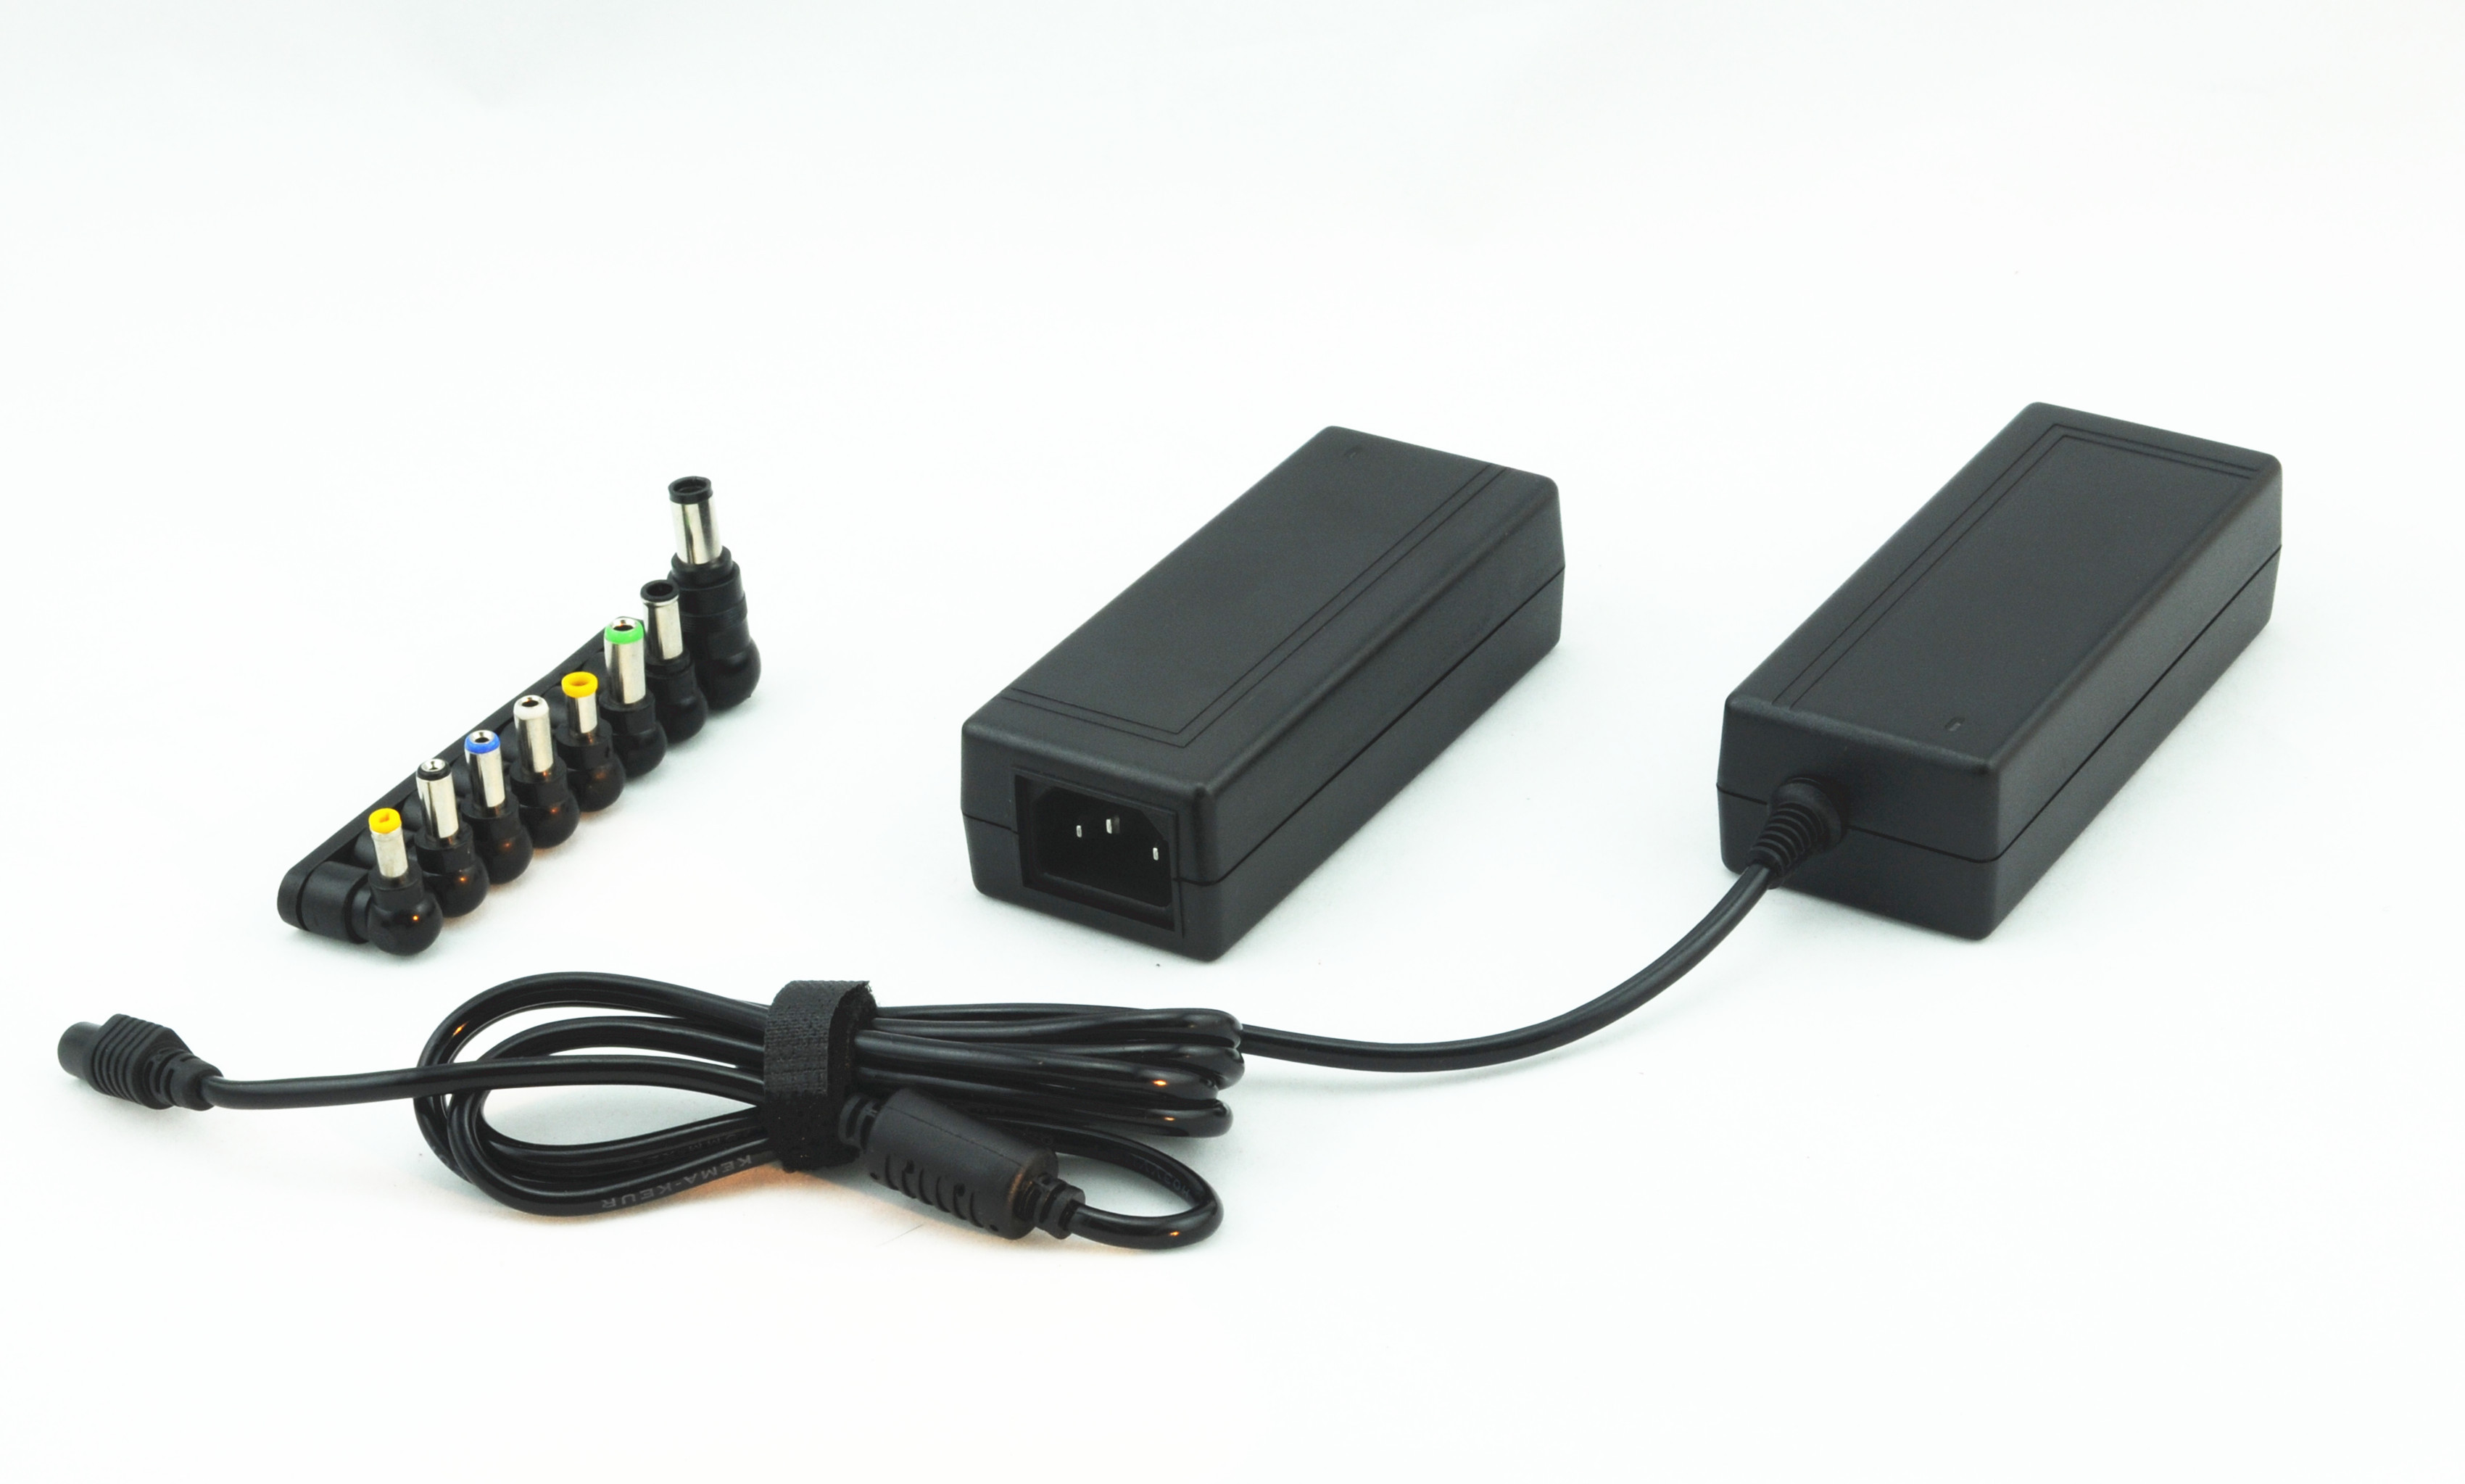 36W Output Universal DC Power Adapter with C6 / C8 / C14 Socket